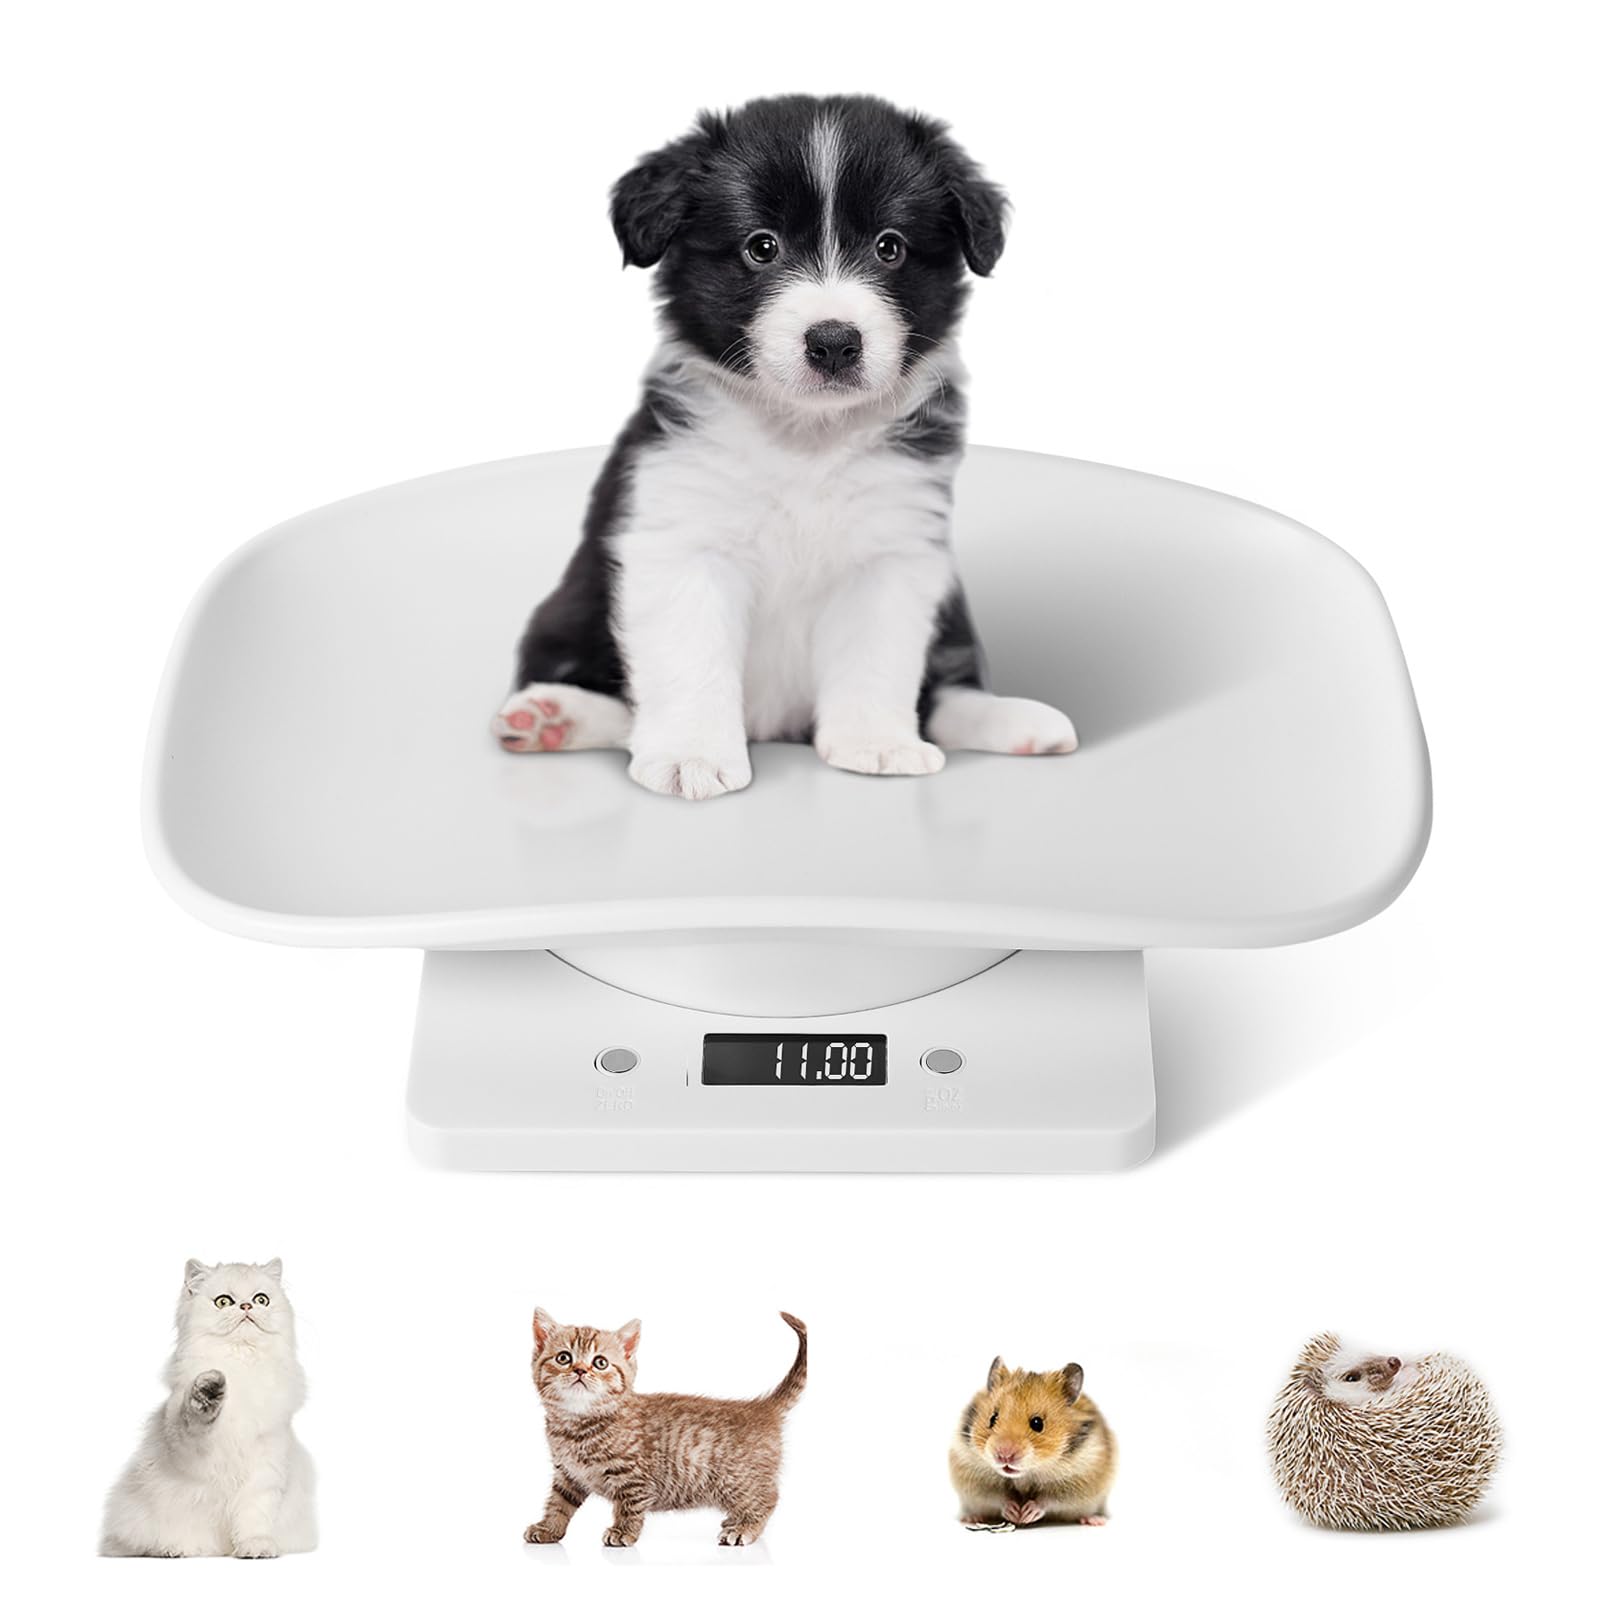 YTDTKJ Digital Pet Scale, Small Animal Weight Scale Portable Electronic LED Scales, Multifunction Kitchen Scale(Max. 22 lbs), for Weigh